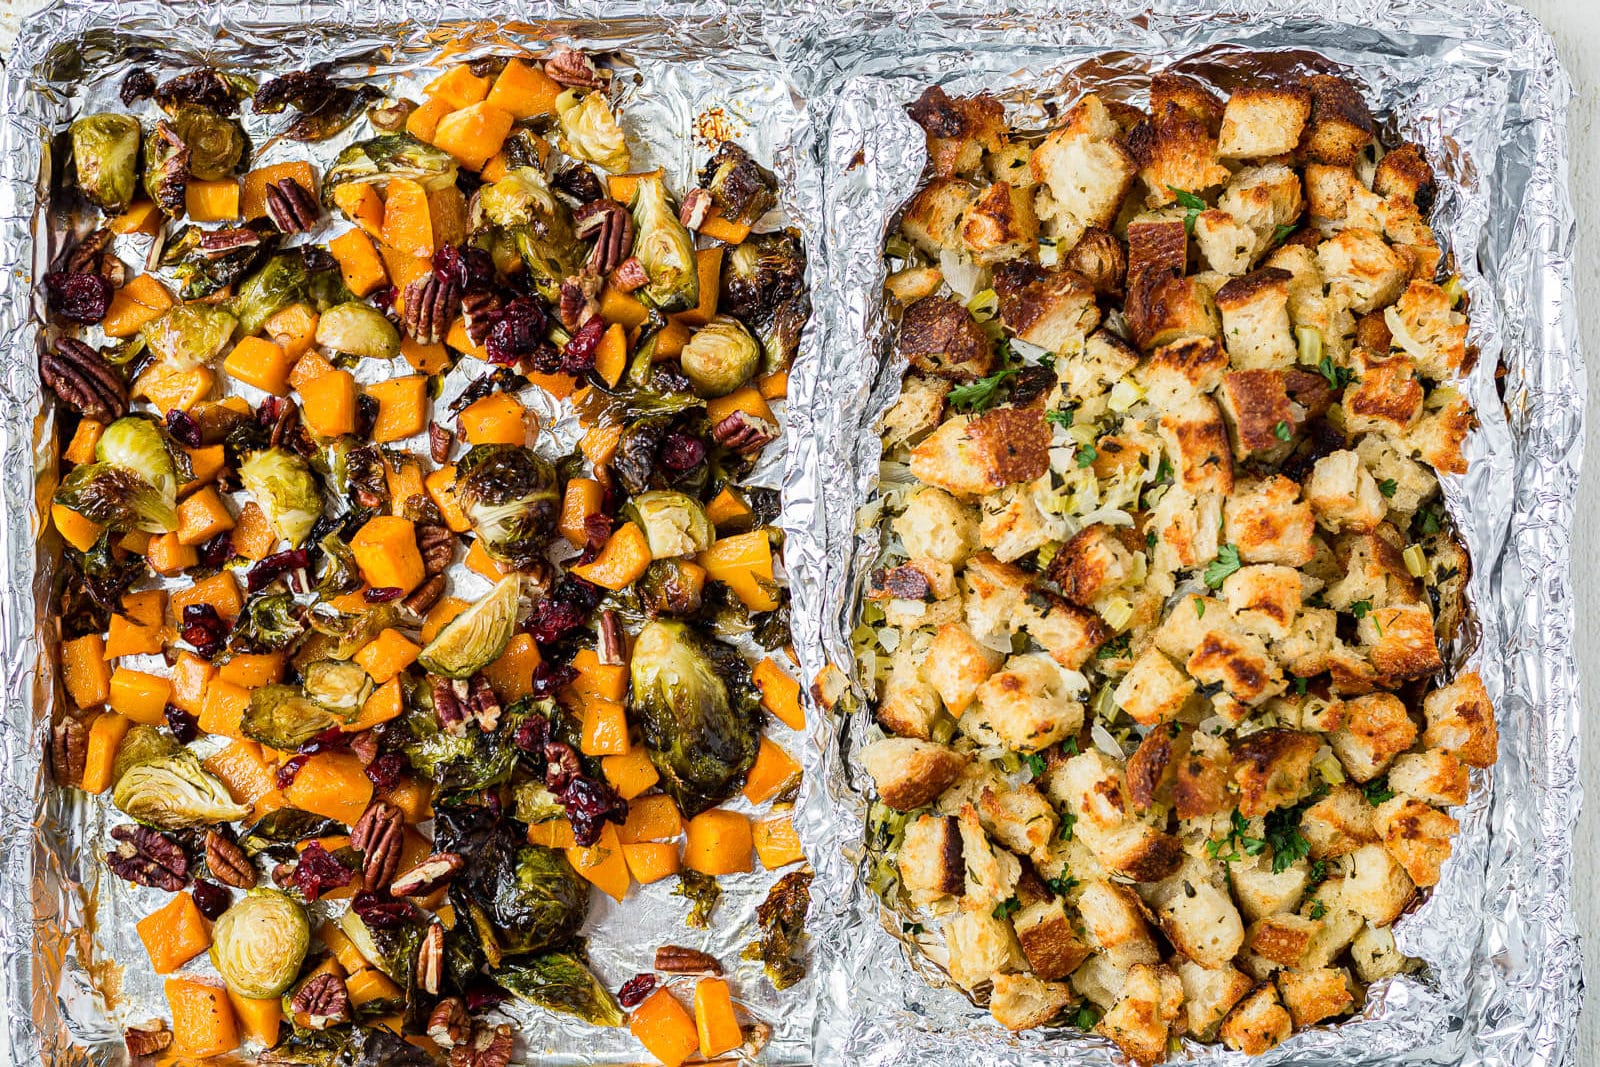 roasted veggies and stuffing for thanksgiving dinner